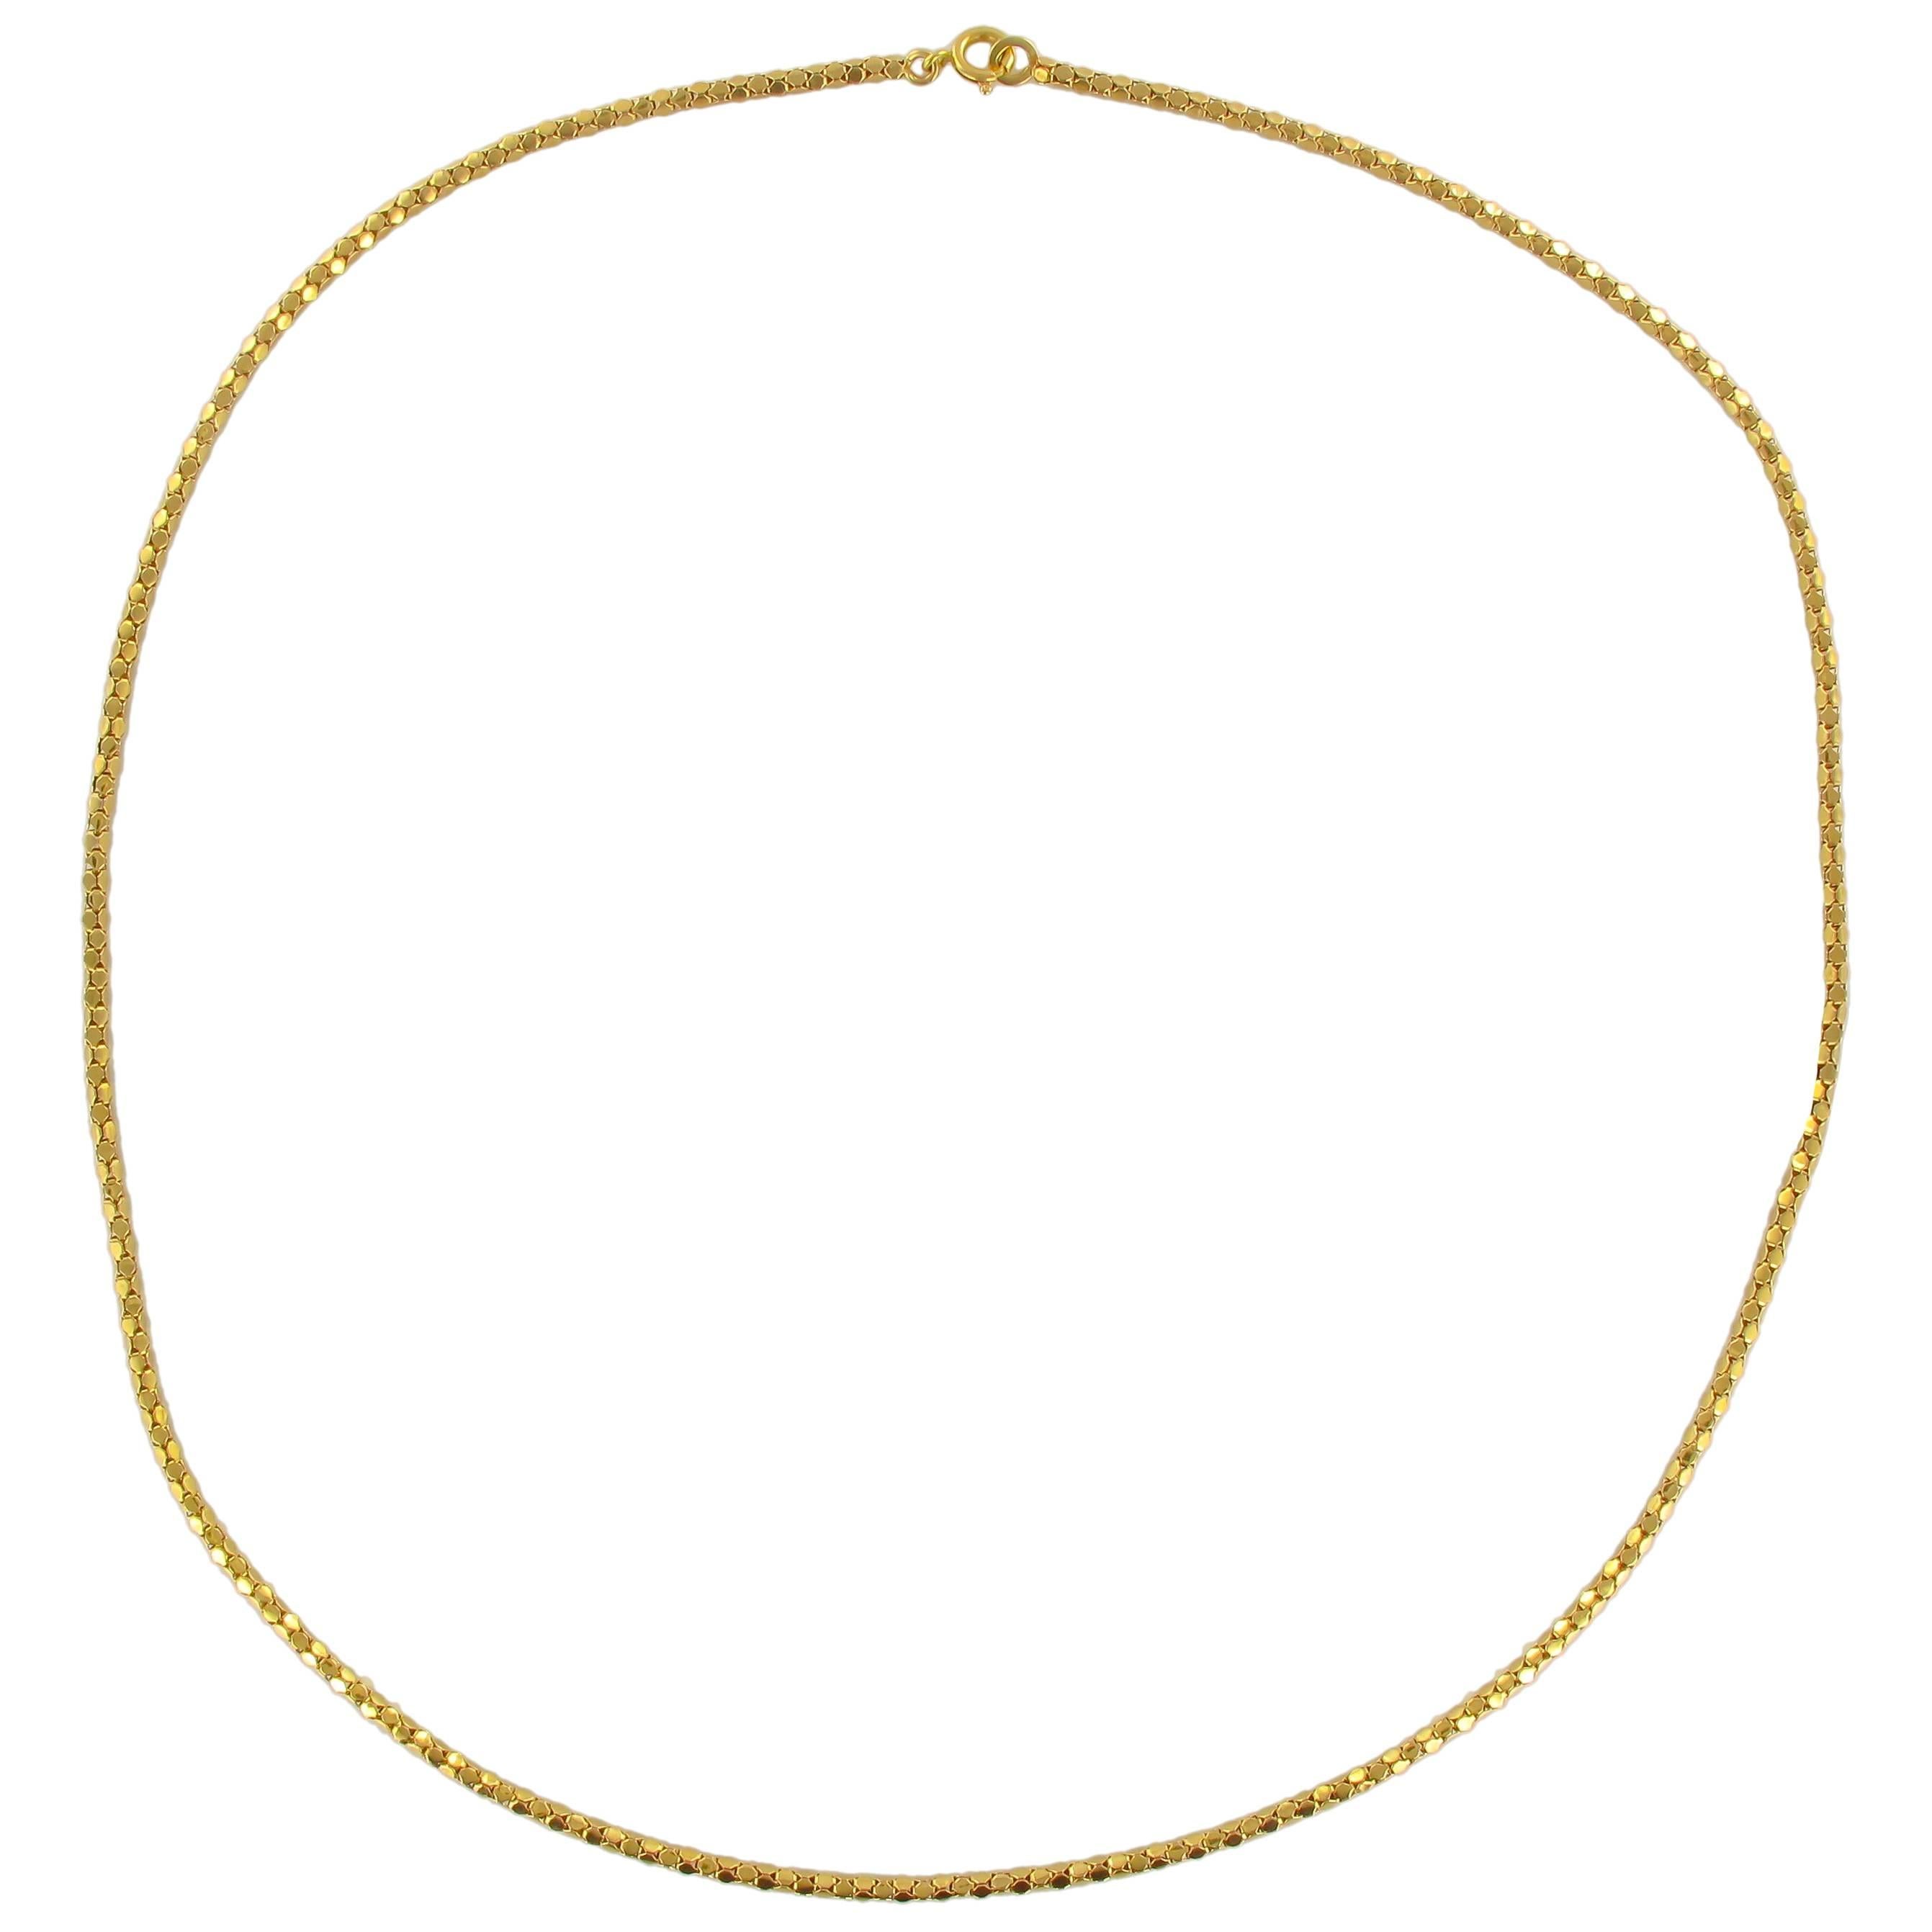 18 carat yellow gold chain, eagle head hallmark.
Type of mesh: snake
Length: 62,5 cm, mesh width: 2,6 mm.
Clasp: spring ring.
Weight: 11,8 g.

Vintage chain - French work 1960s.

 